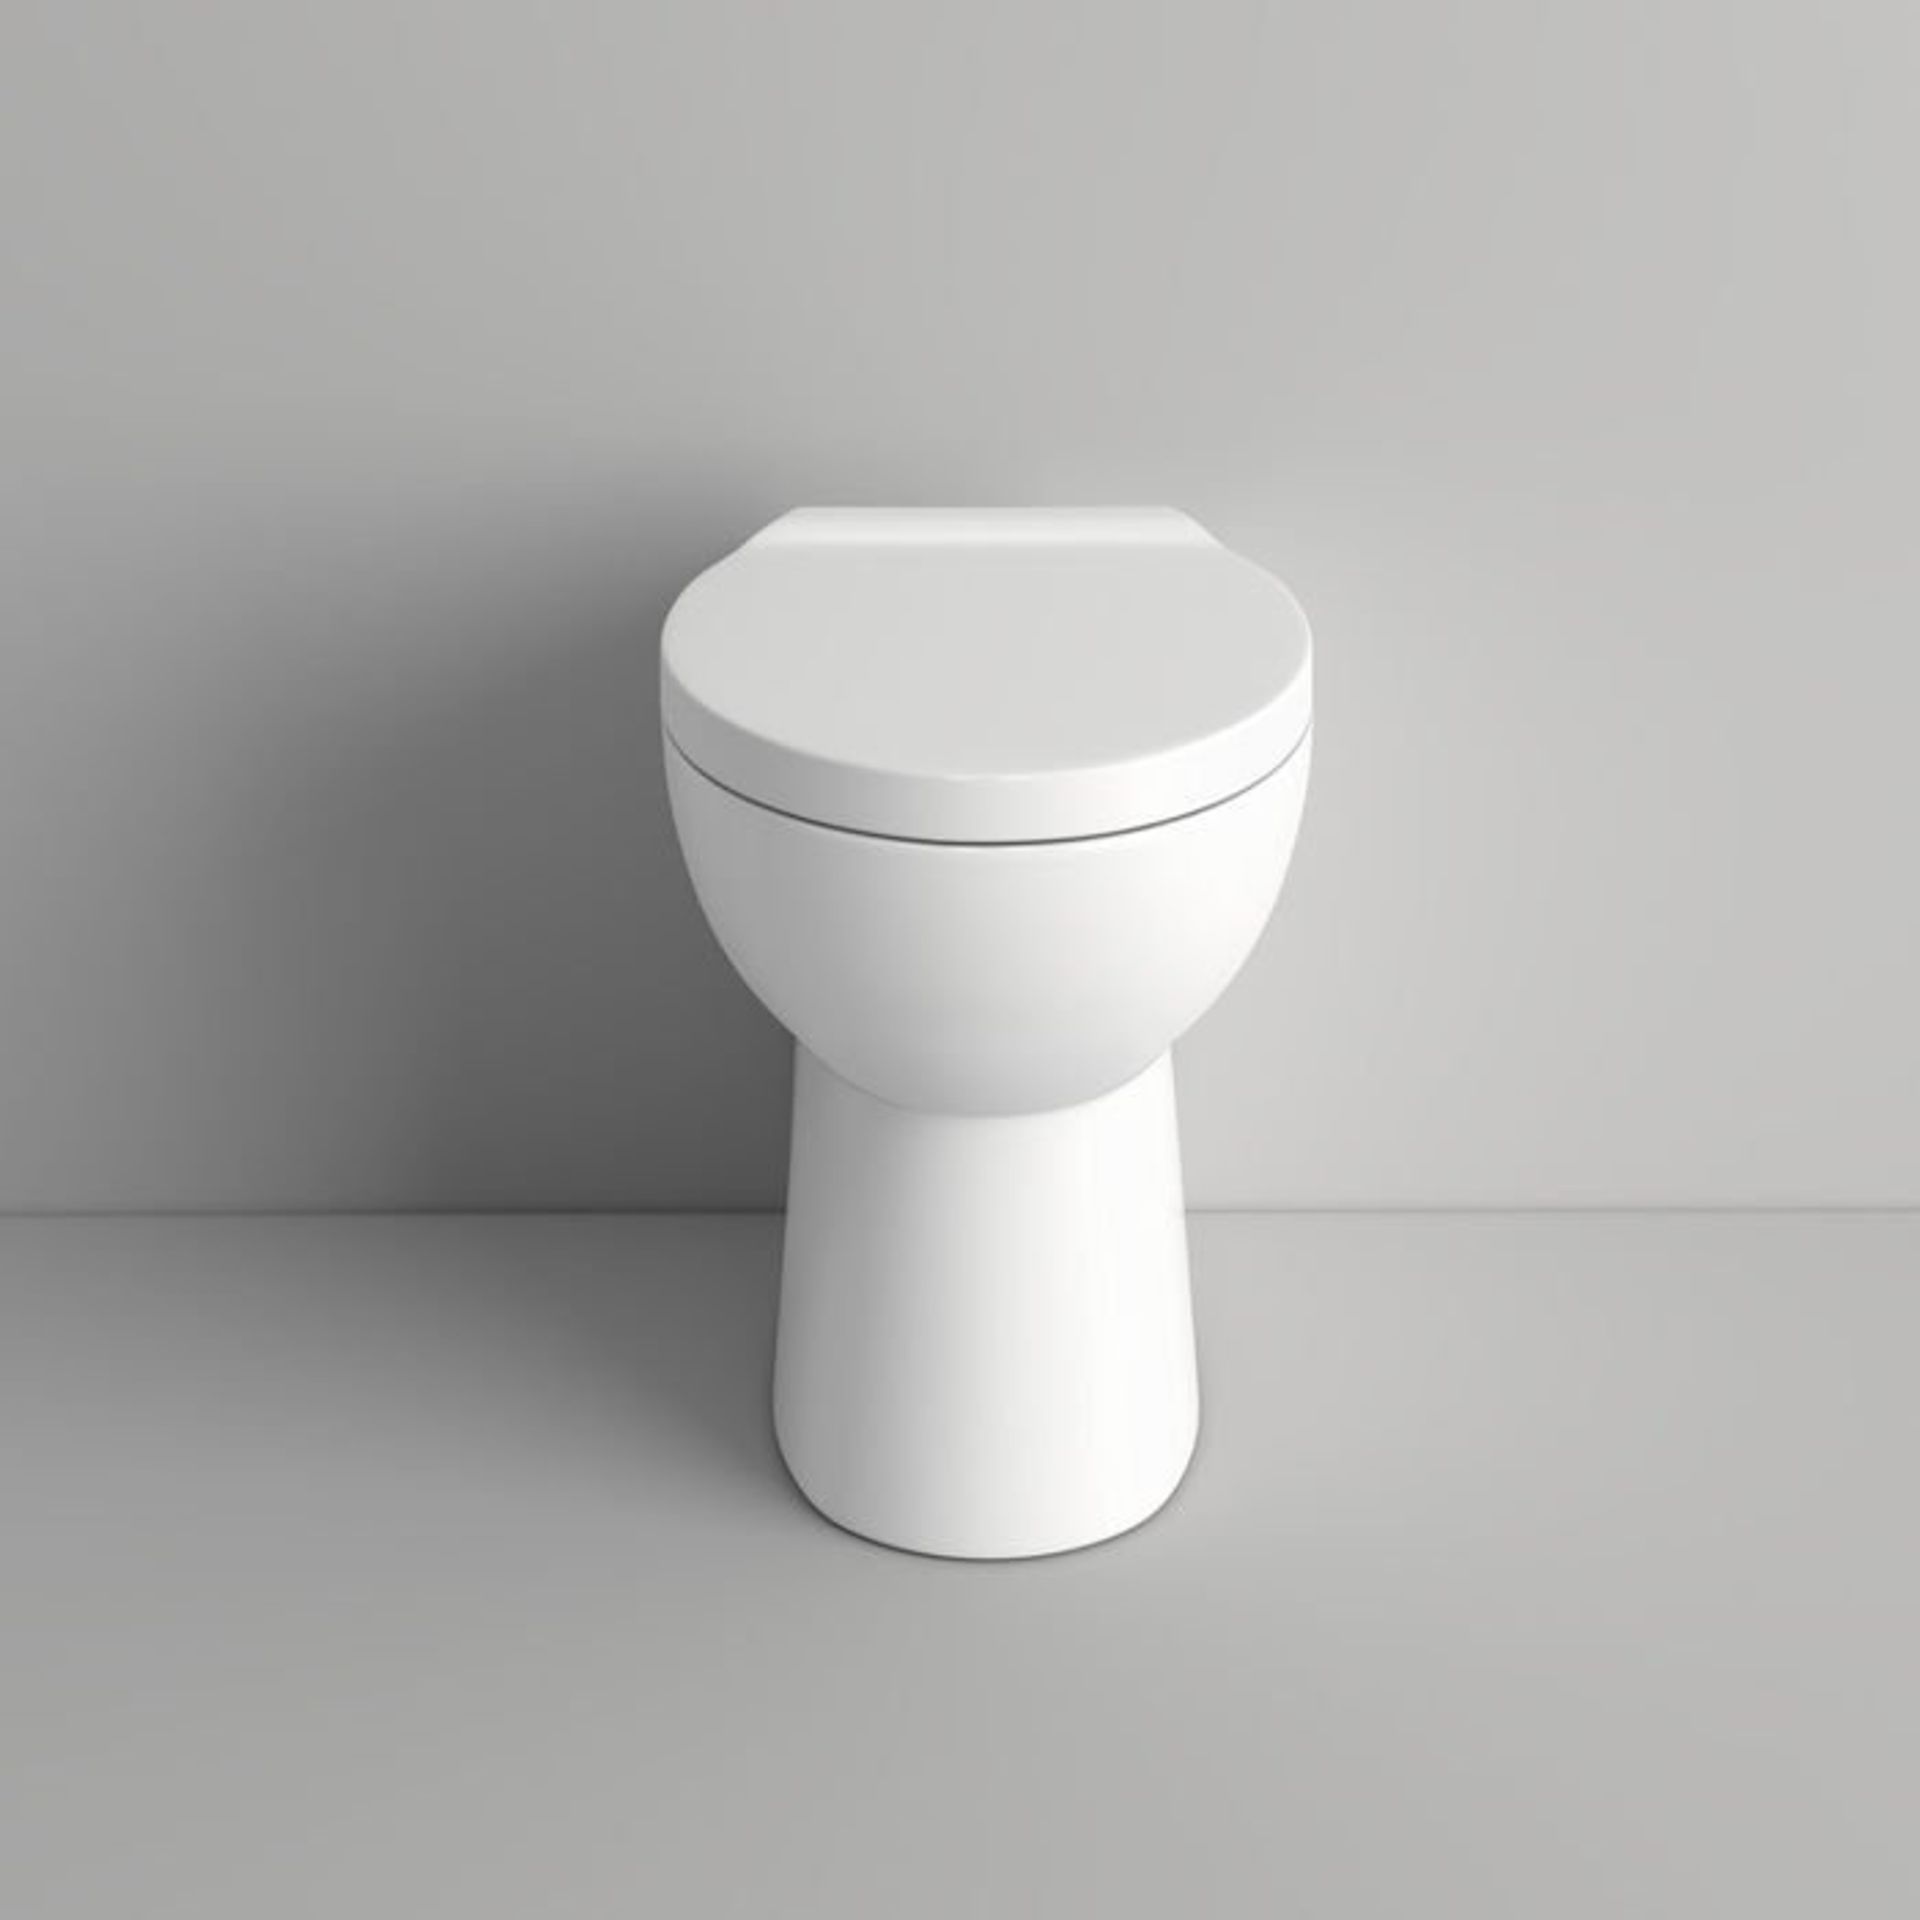 (G163) Crosby Back to Wall Toilet inc Soft Close Seat Made from White Vitreous China Finished in a - Image 2 of 3